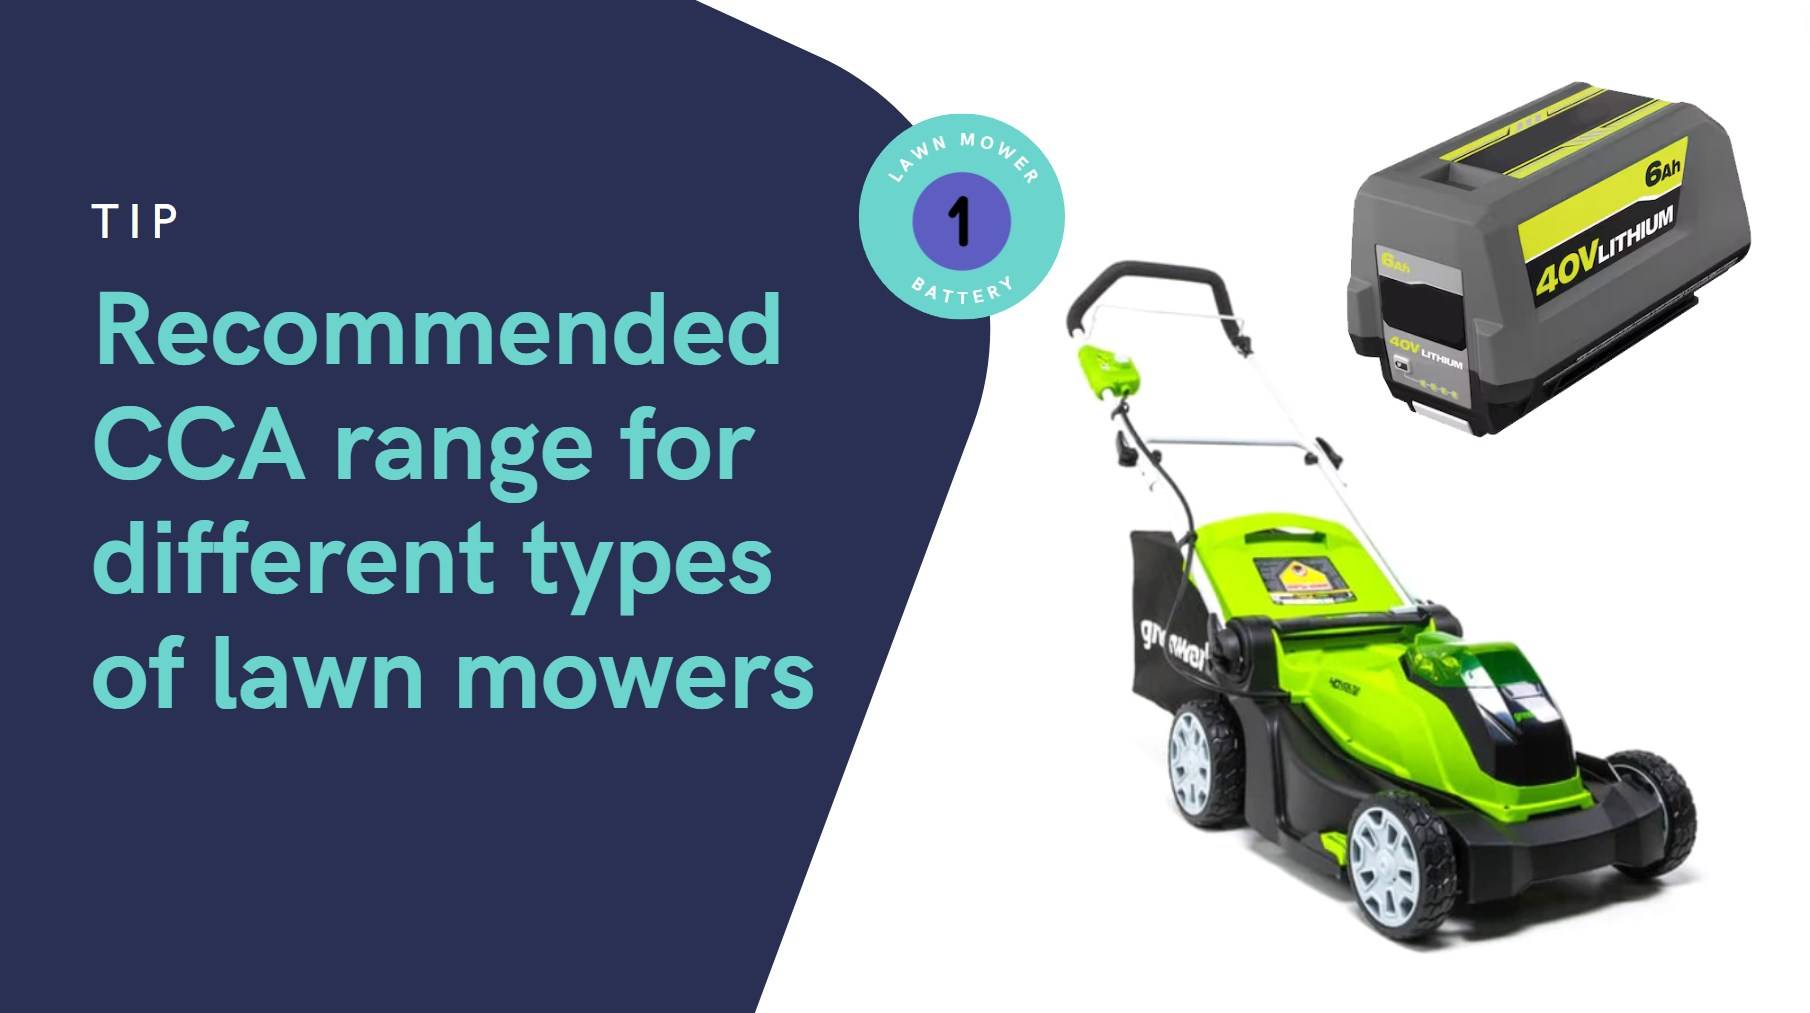 The recommended CCA range for different types of lawn mowers